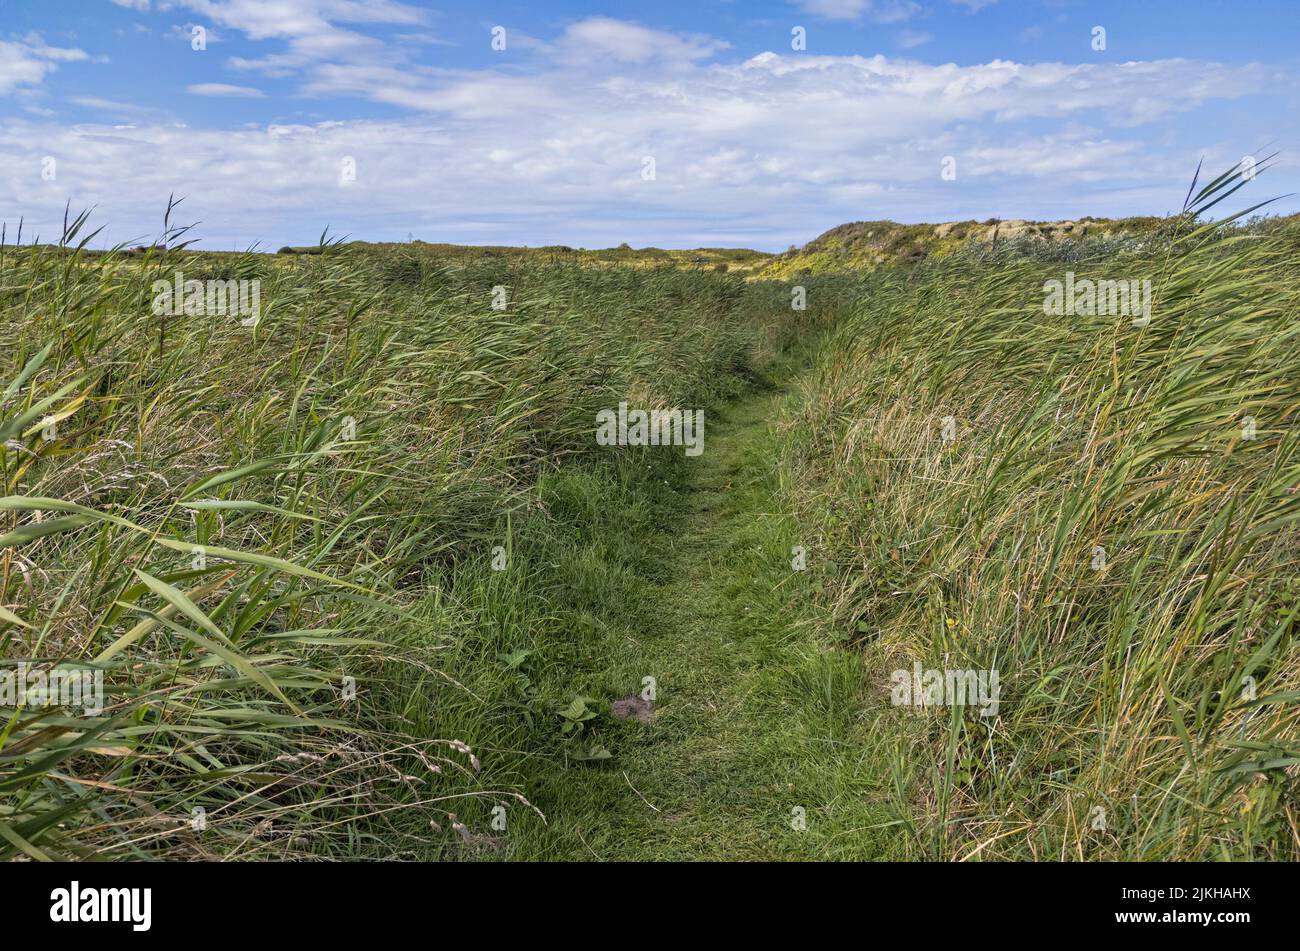 A pathway through green tall grass against a cloudy sky on Alderney island, UK Stock Photo